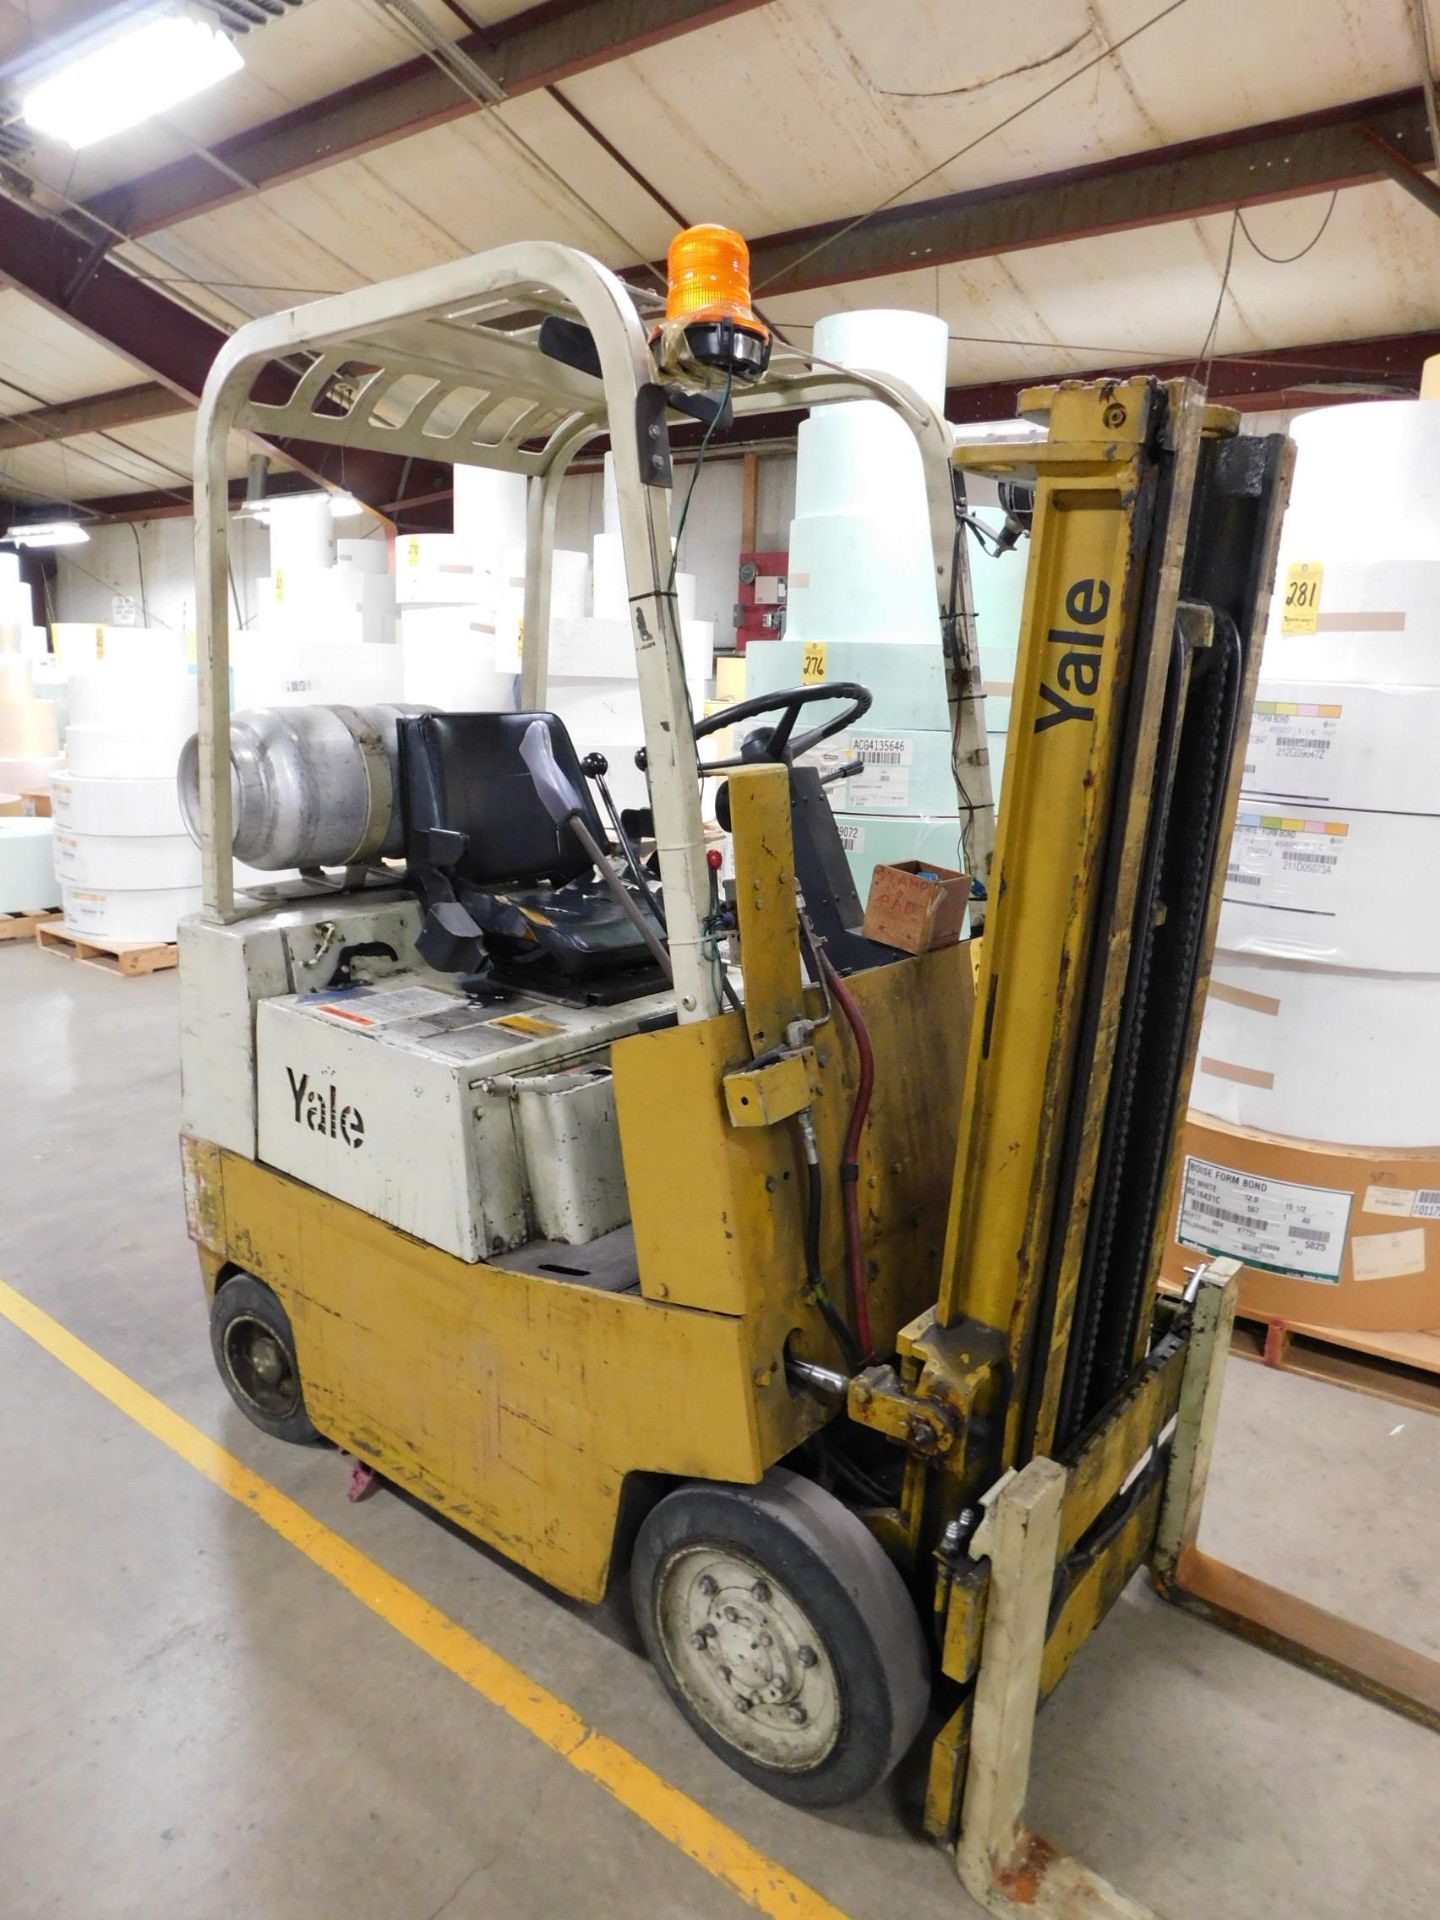 Yale Model GLC025UA5071 Fork Lift, s/n P380451, LP, Hard Tire, 2-Stage Mast, Auxiliary Hook Up for